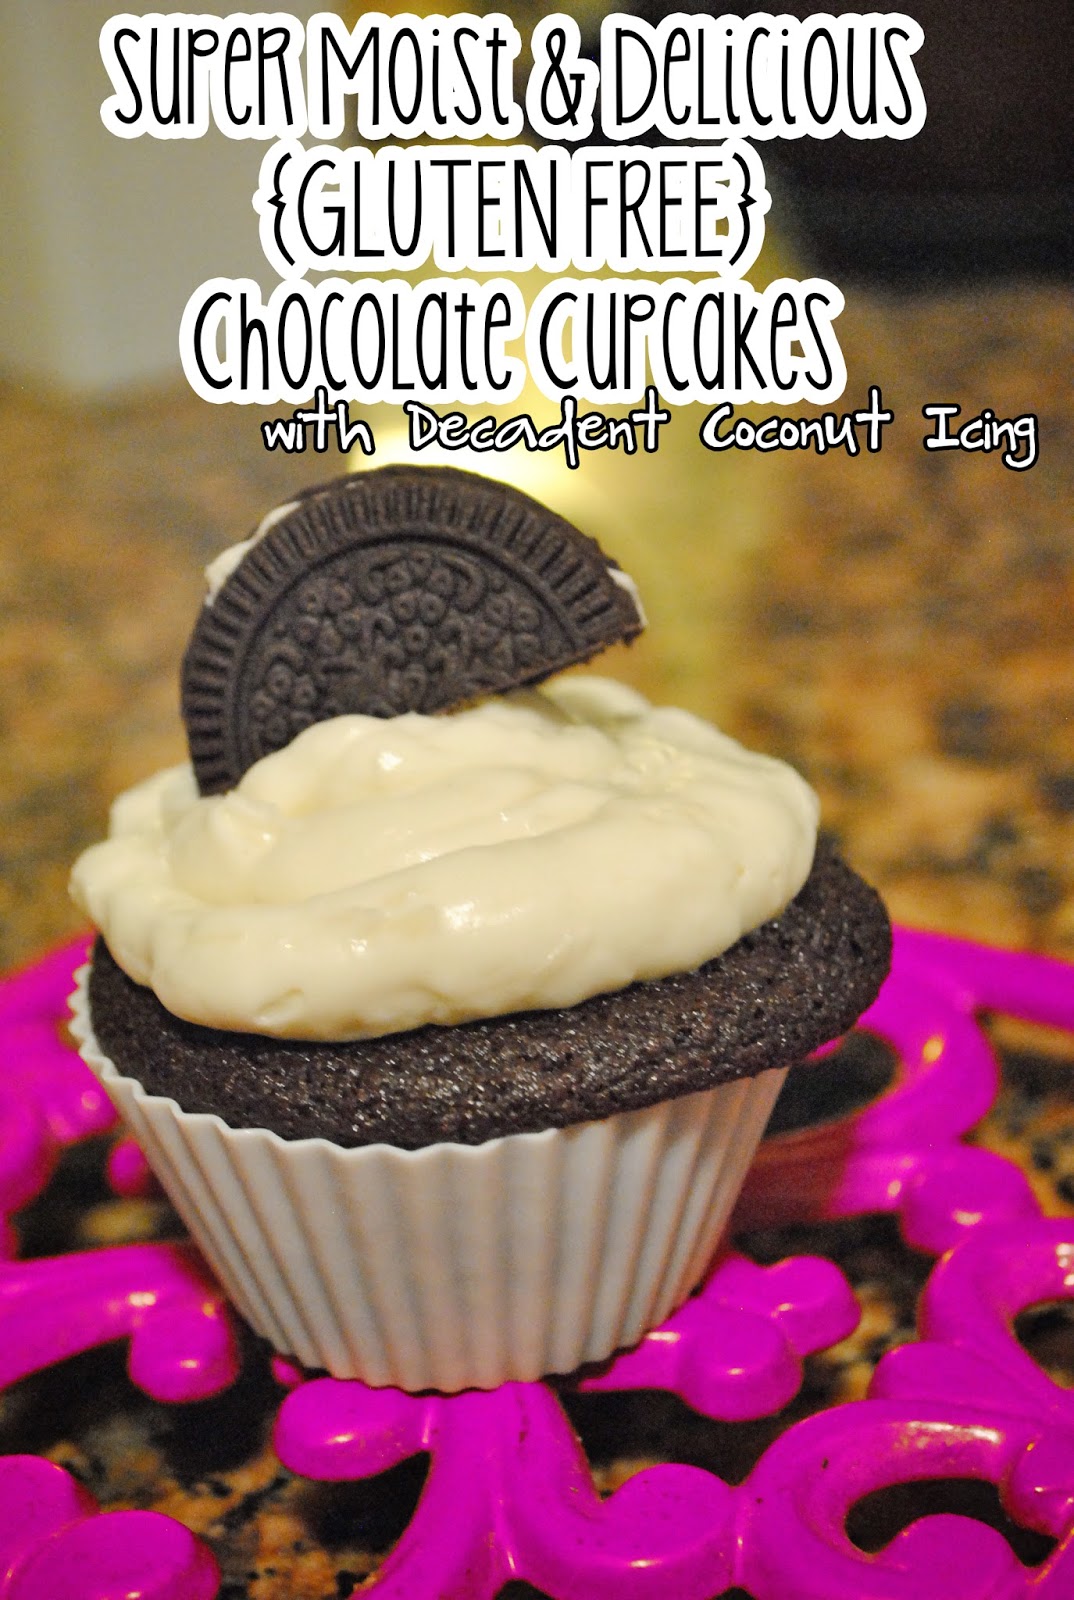 Super Moist & Delicious GLUTEN FREE Chocolate Cupcakes with Decadent Coconut Icing Recipe